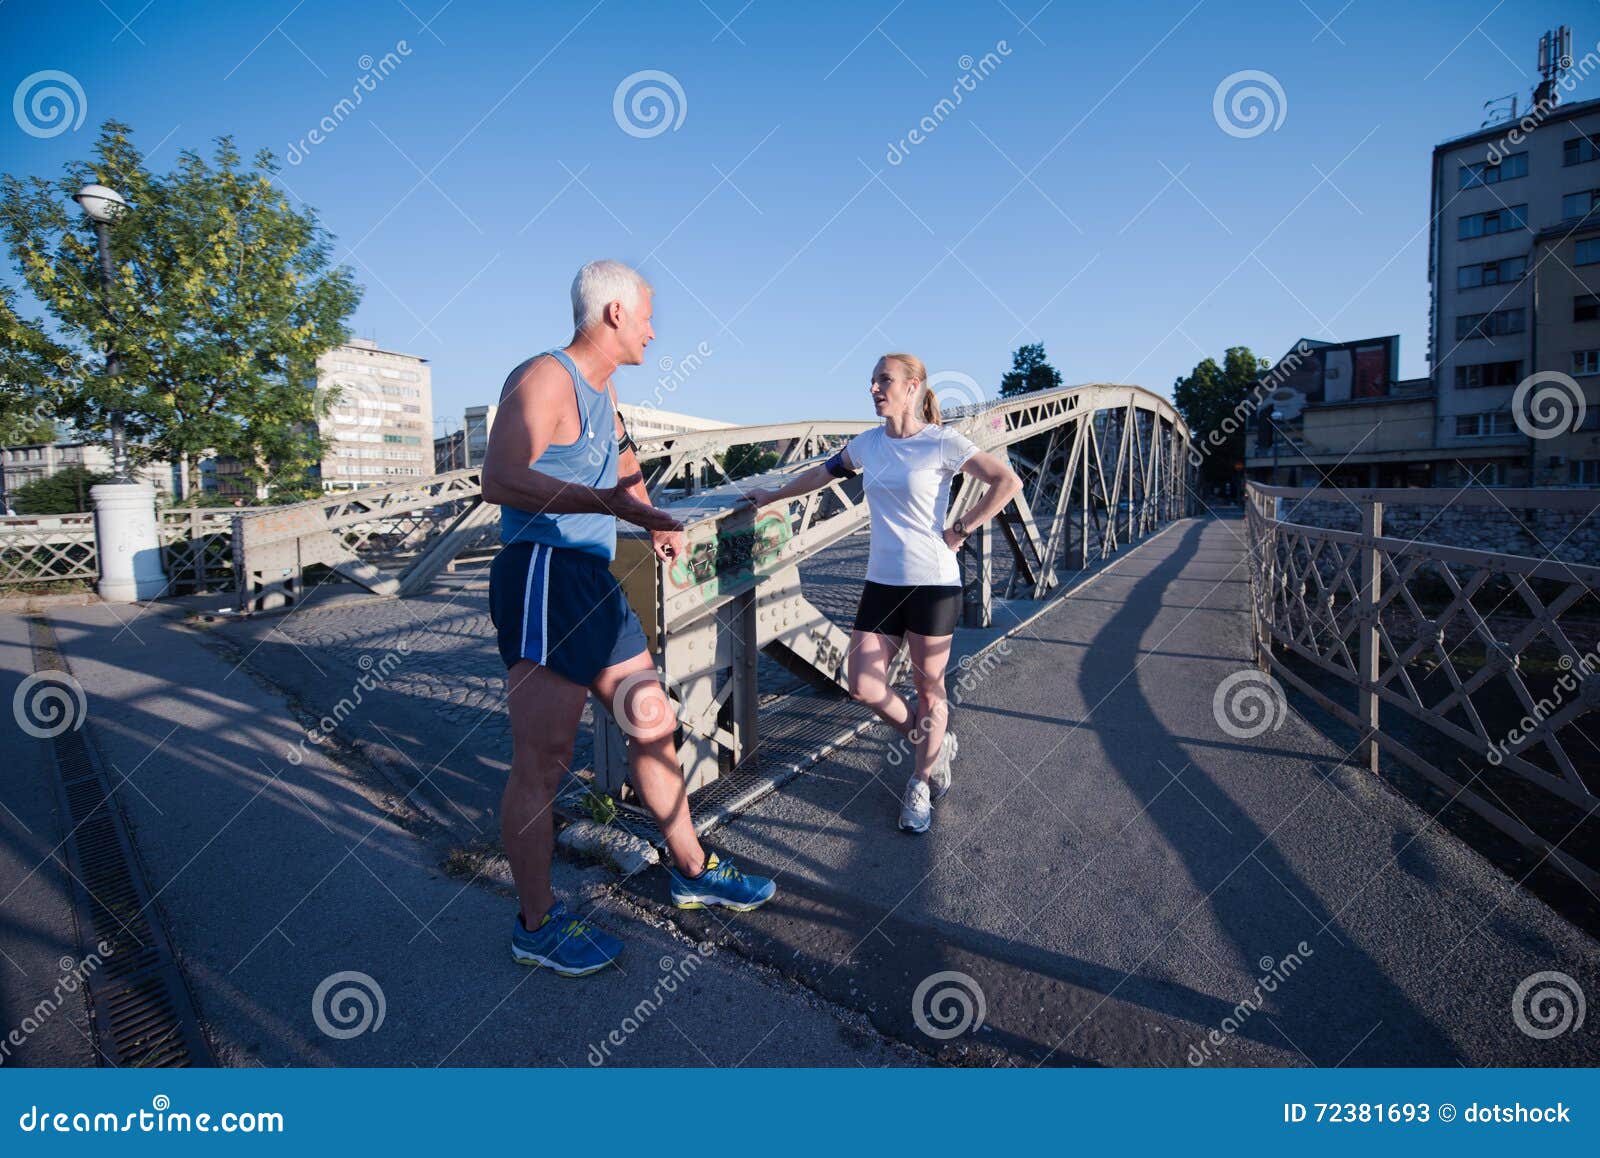 jogging couple planning running route and setting music stock image